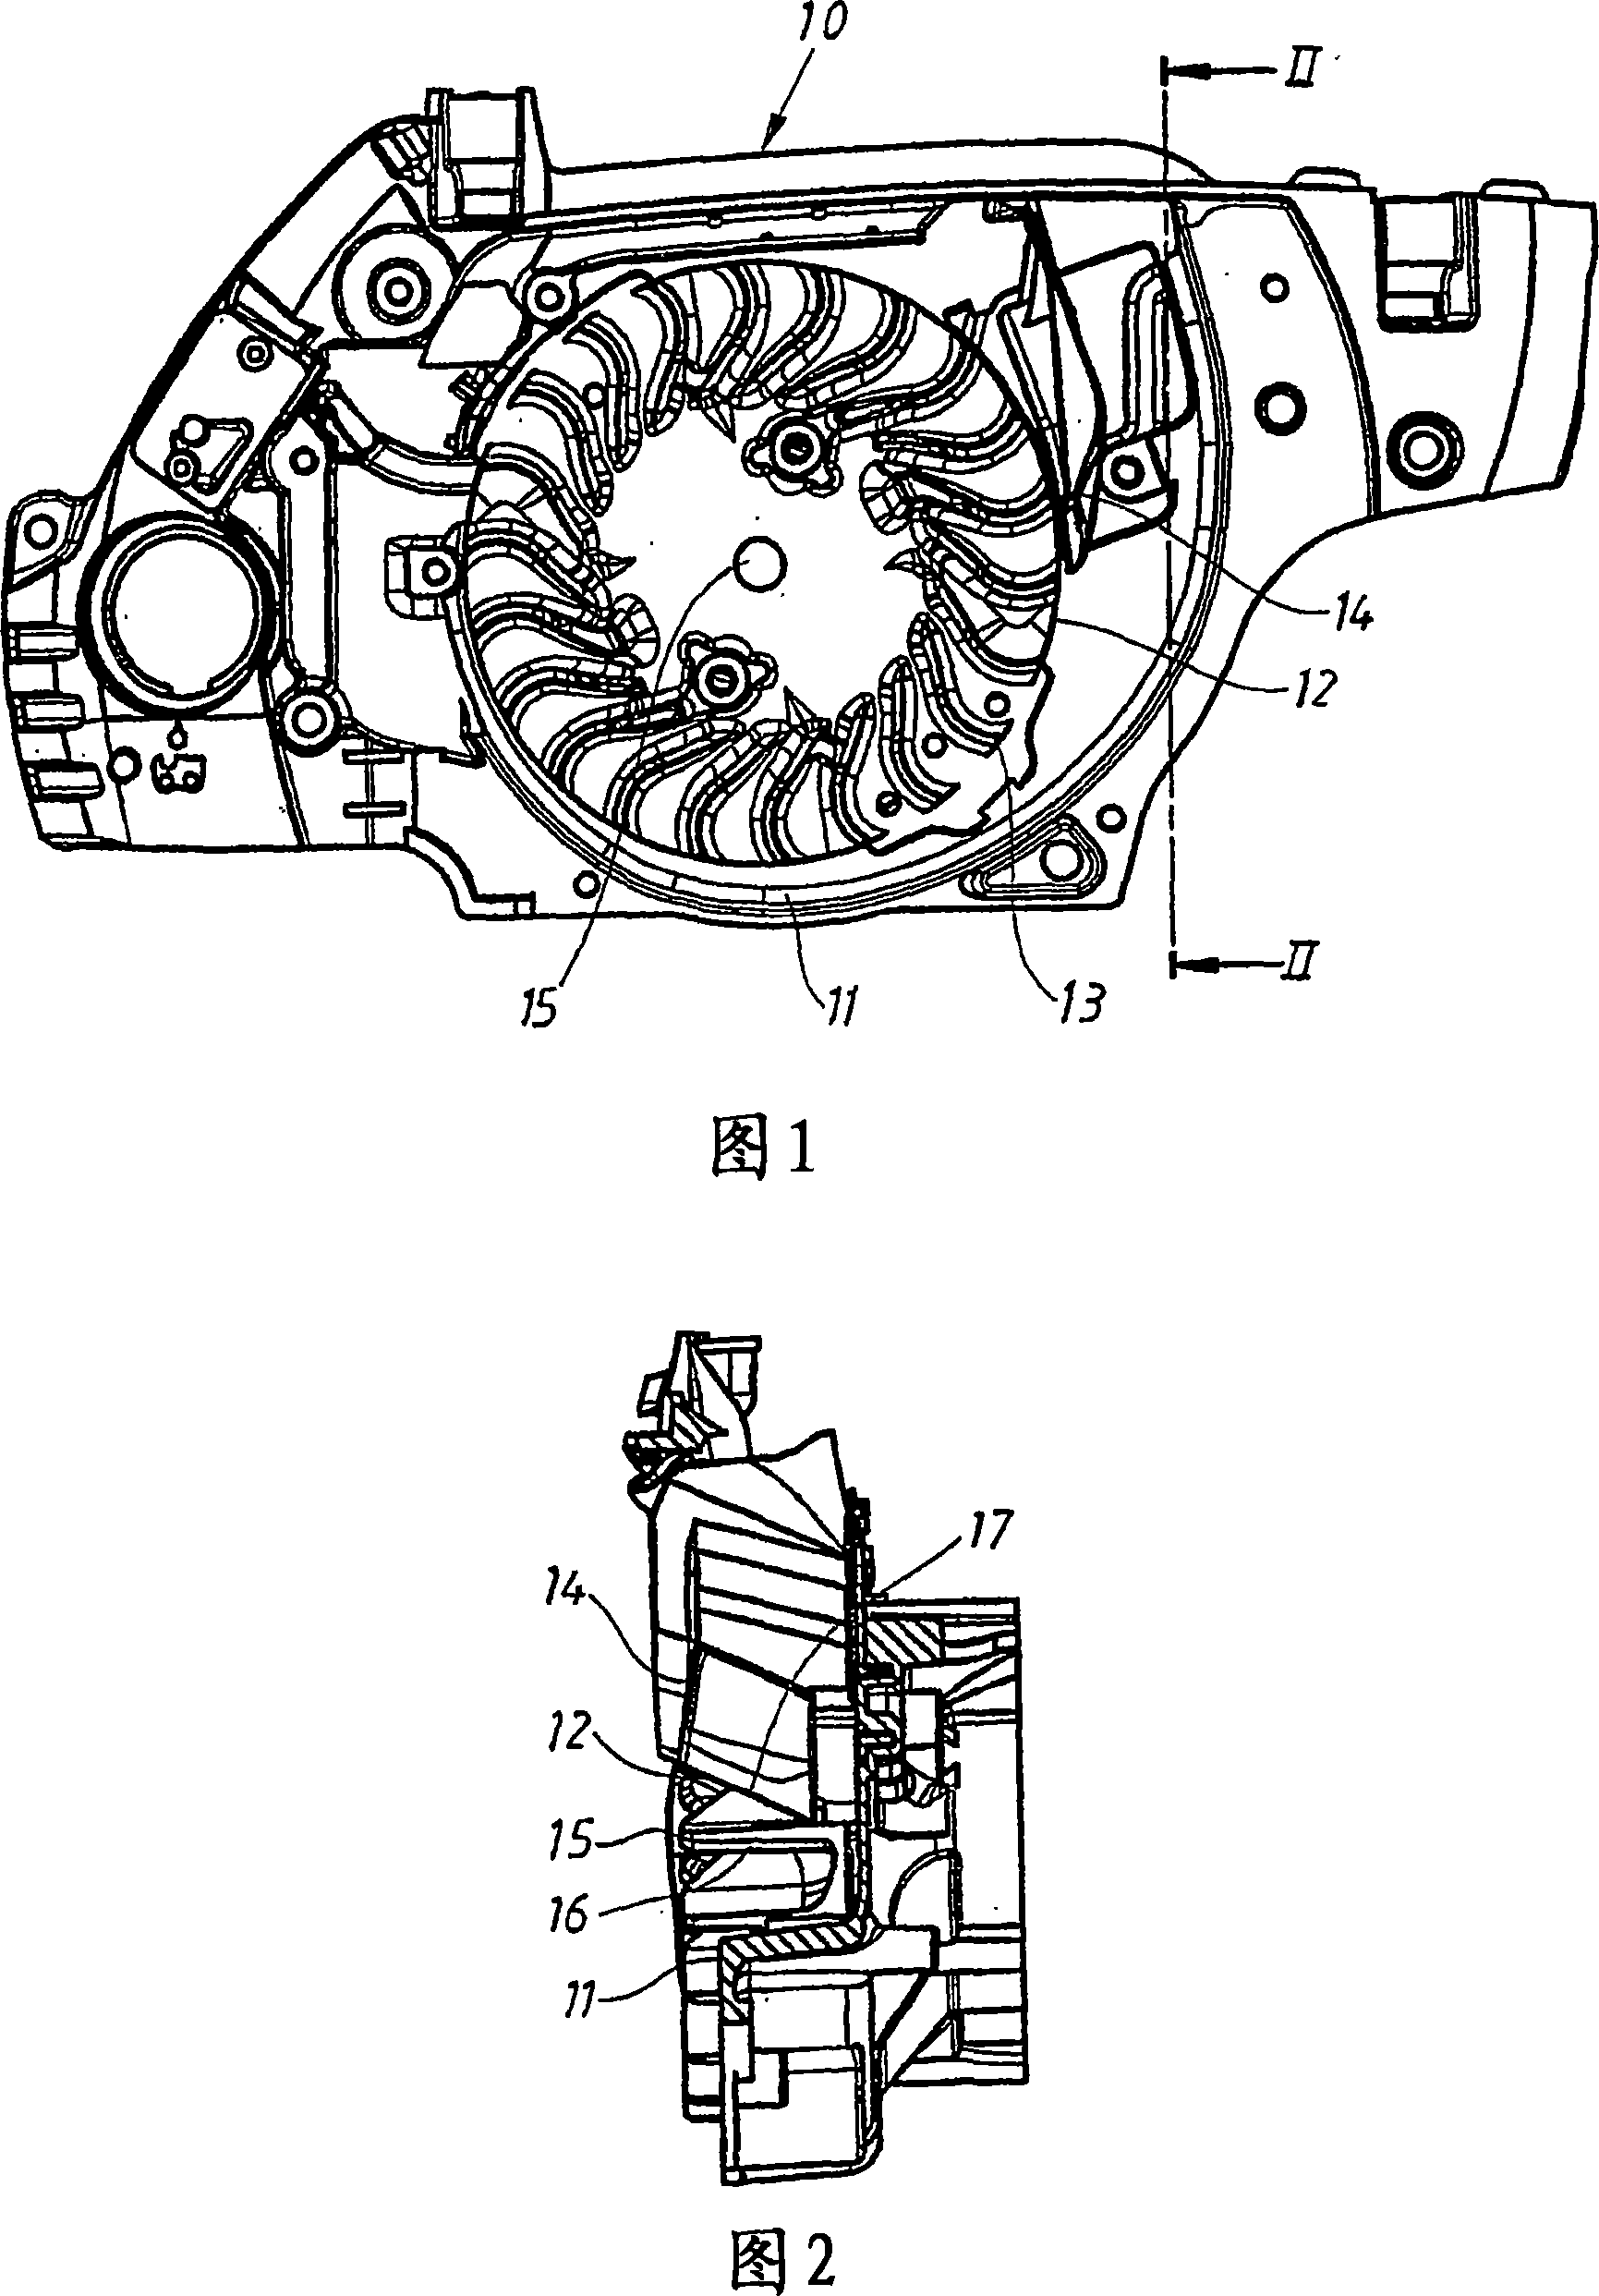 Arrangement in air-cooled internal combustion engine